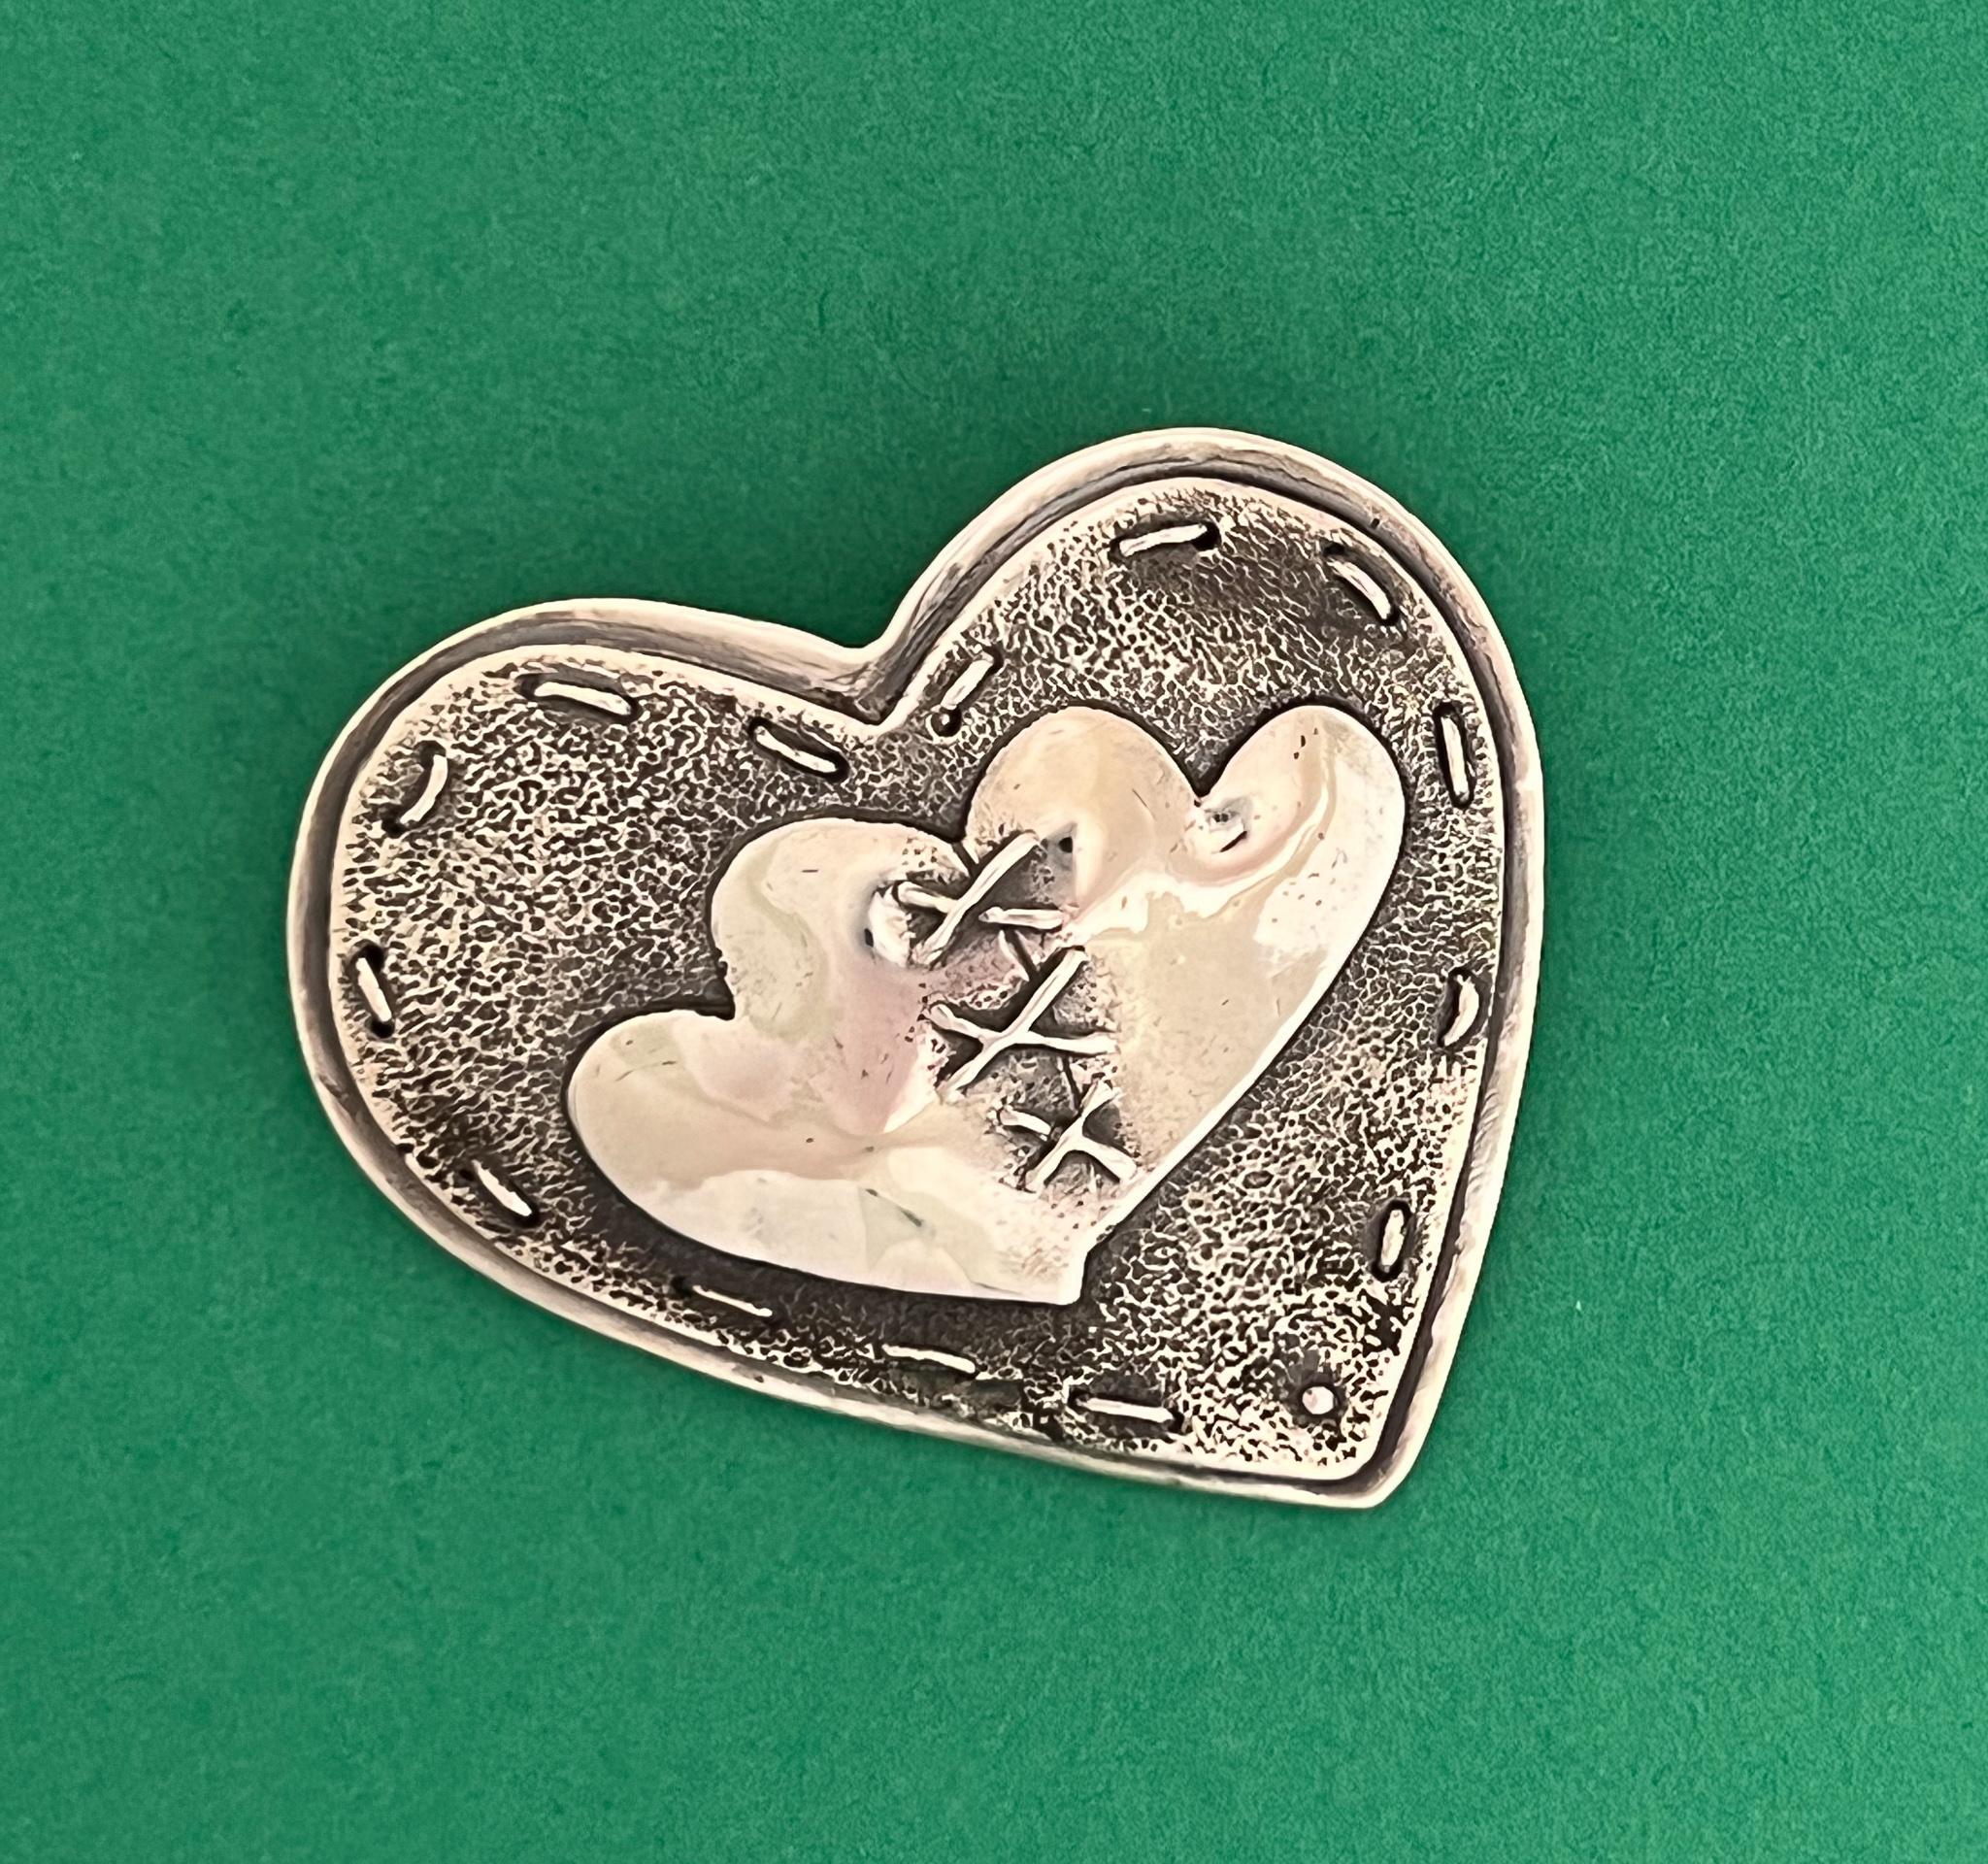 Together  Three Hearts, by Kerr Green, sterling silver, pin, pendant, stitched,contempoary

Artist jewelry line from Santa Fe, New Mexico. Can be worn as a pin or pendant. Layered, stitched cast silver. 
Art ready to wear.